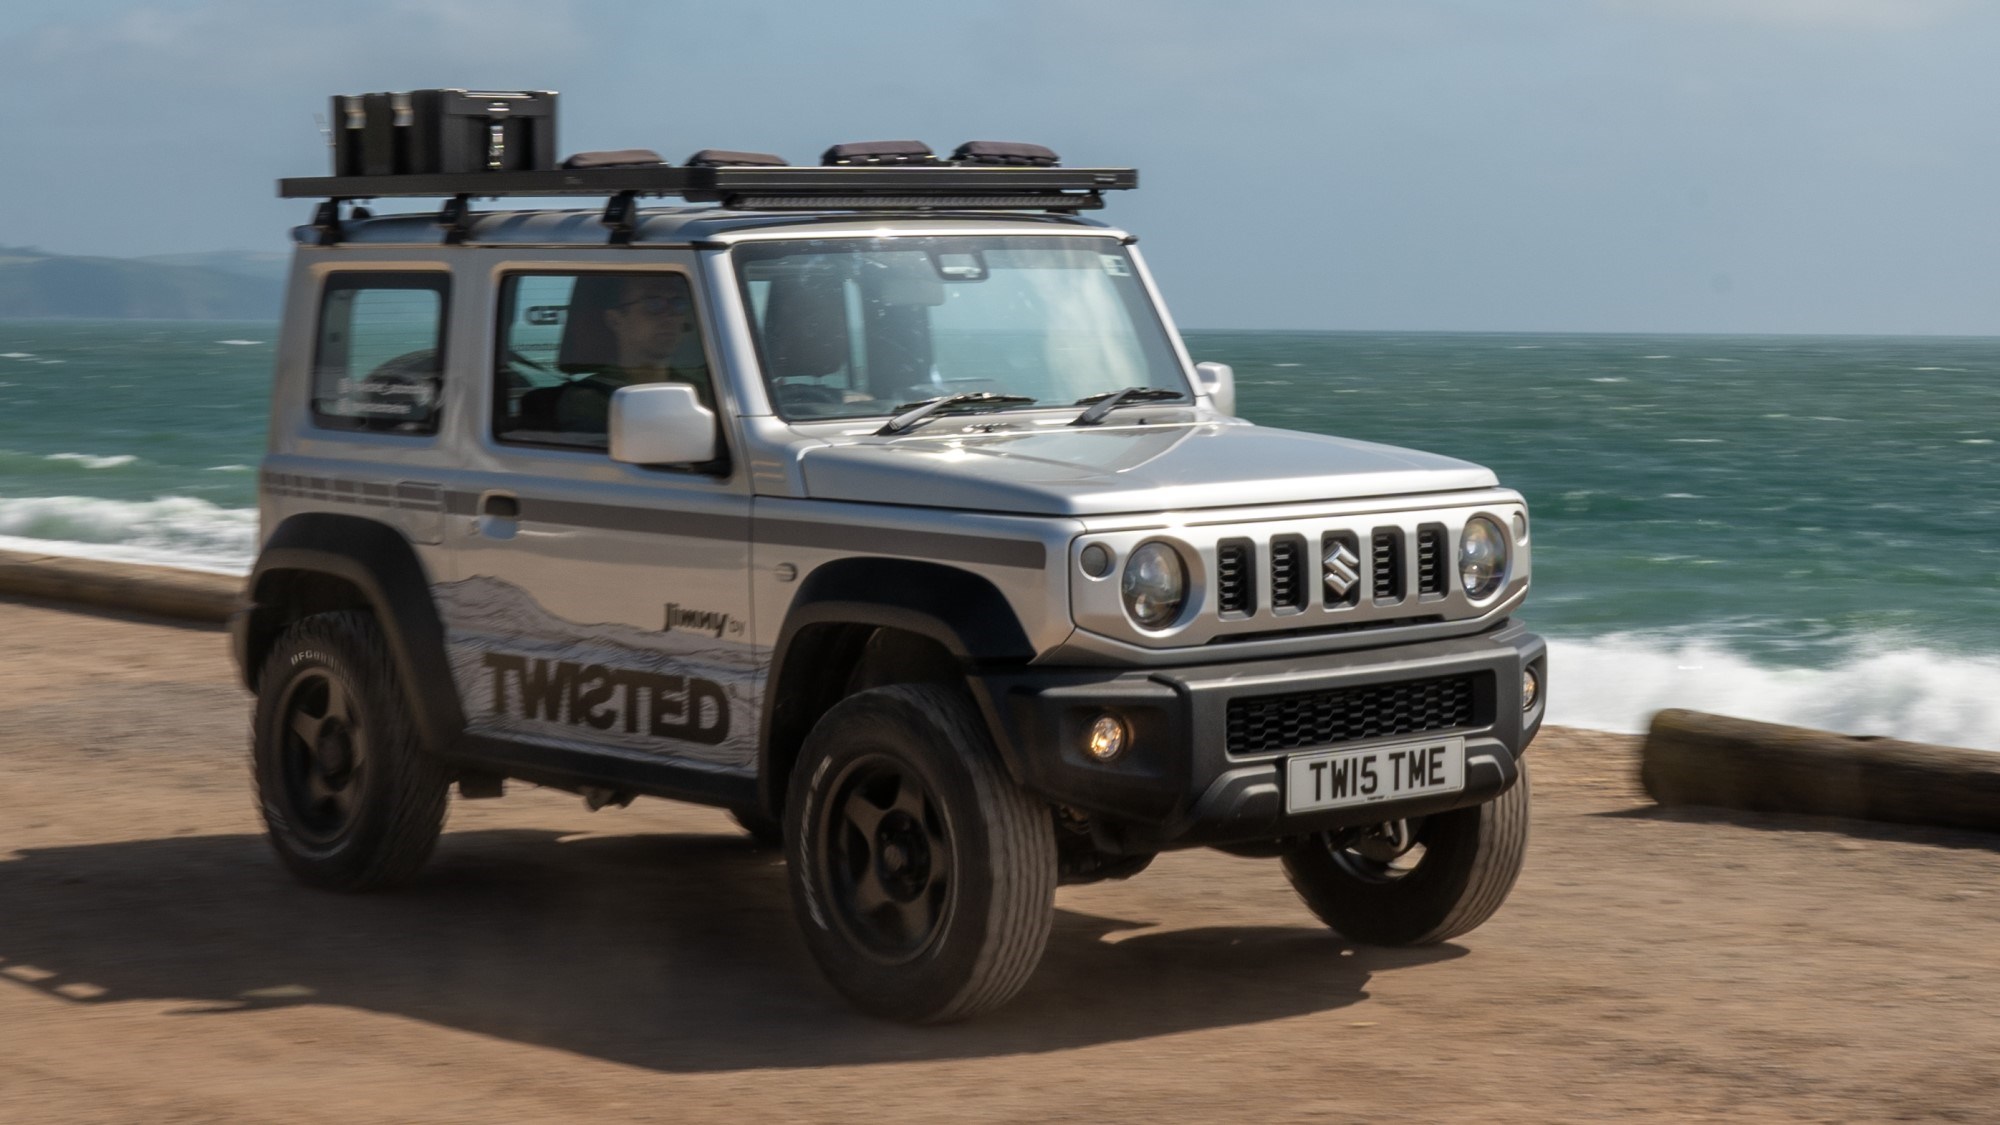 https://car-images.bauersecure.com/wp-images/169823/90-twisted-jimny-front34.jpg